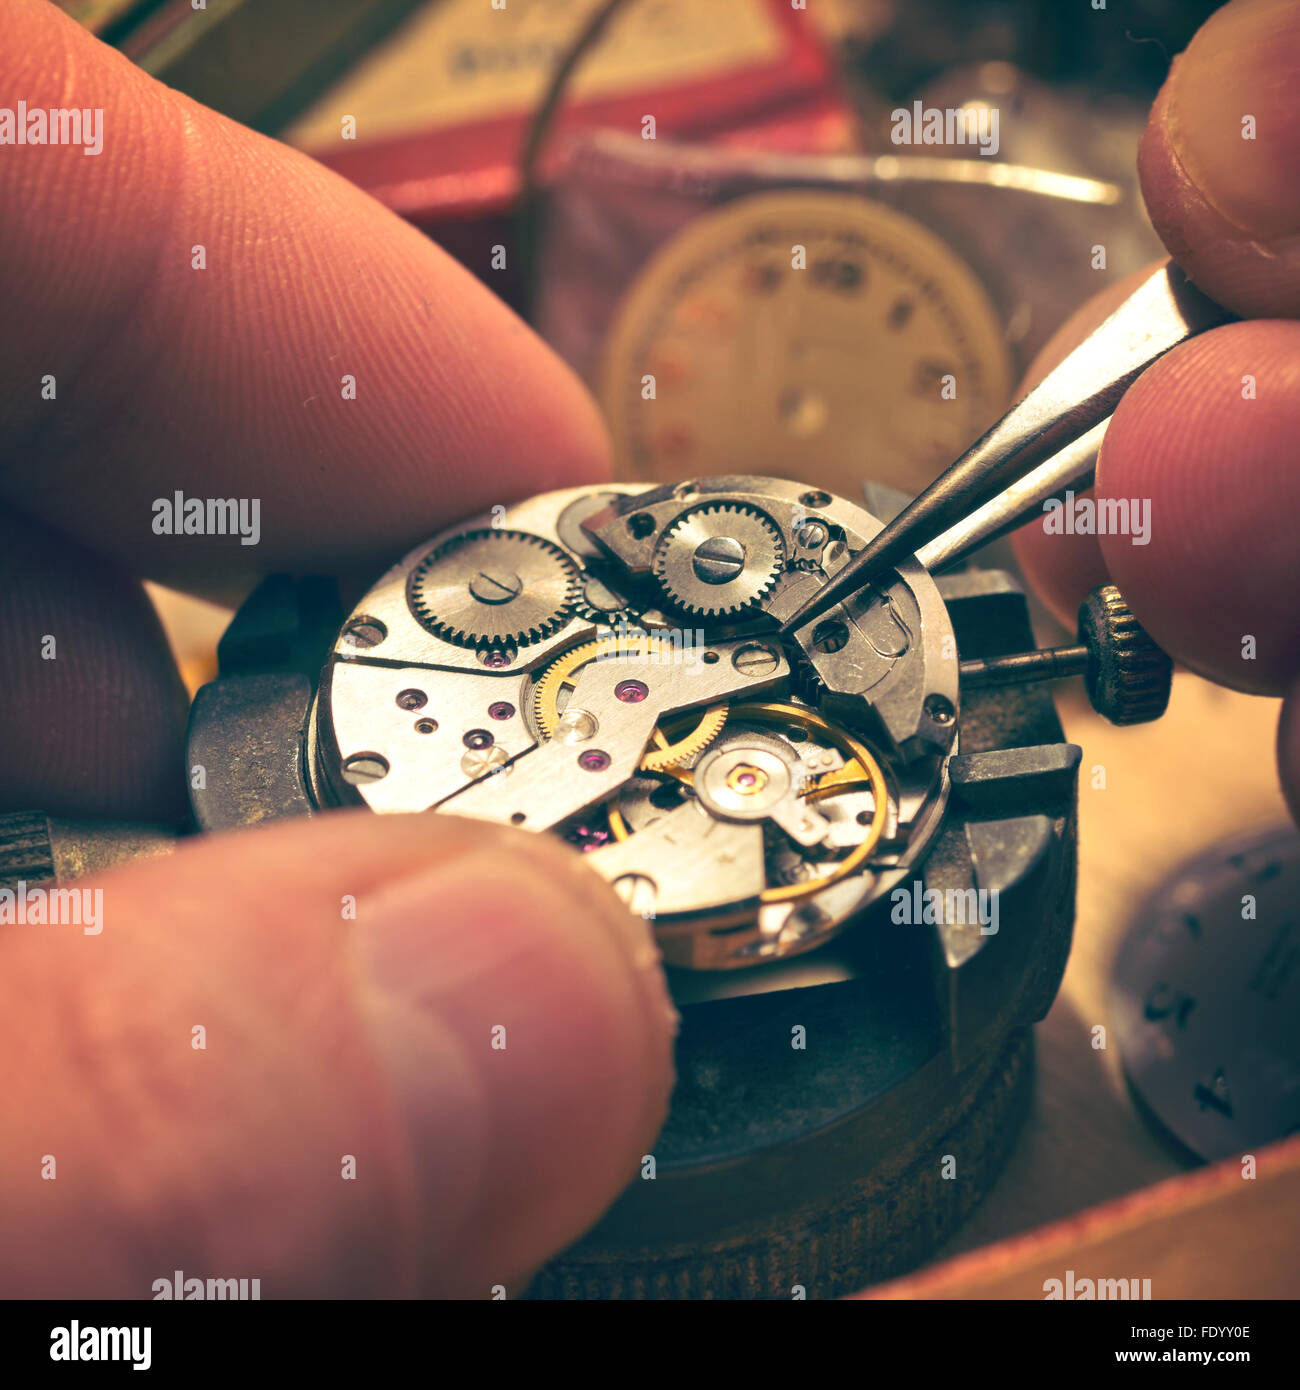 Working On A Mechanical Watch. A watch makers work top. The inside workings of a vintage mechanical watch. Stock Photo